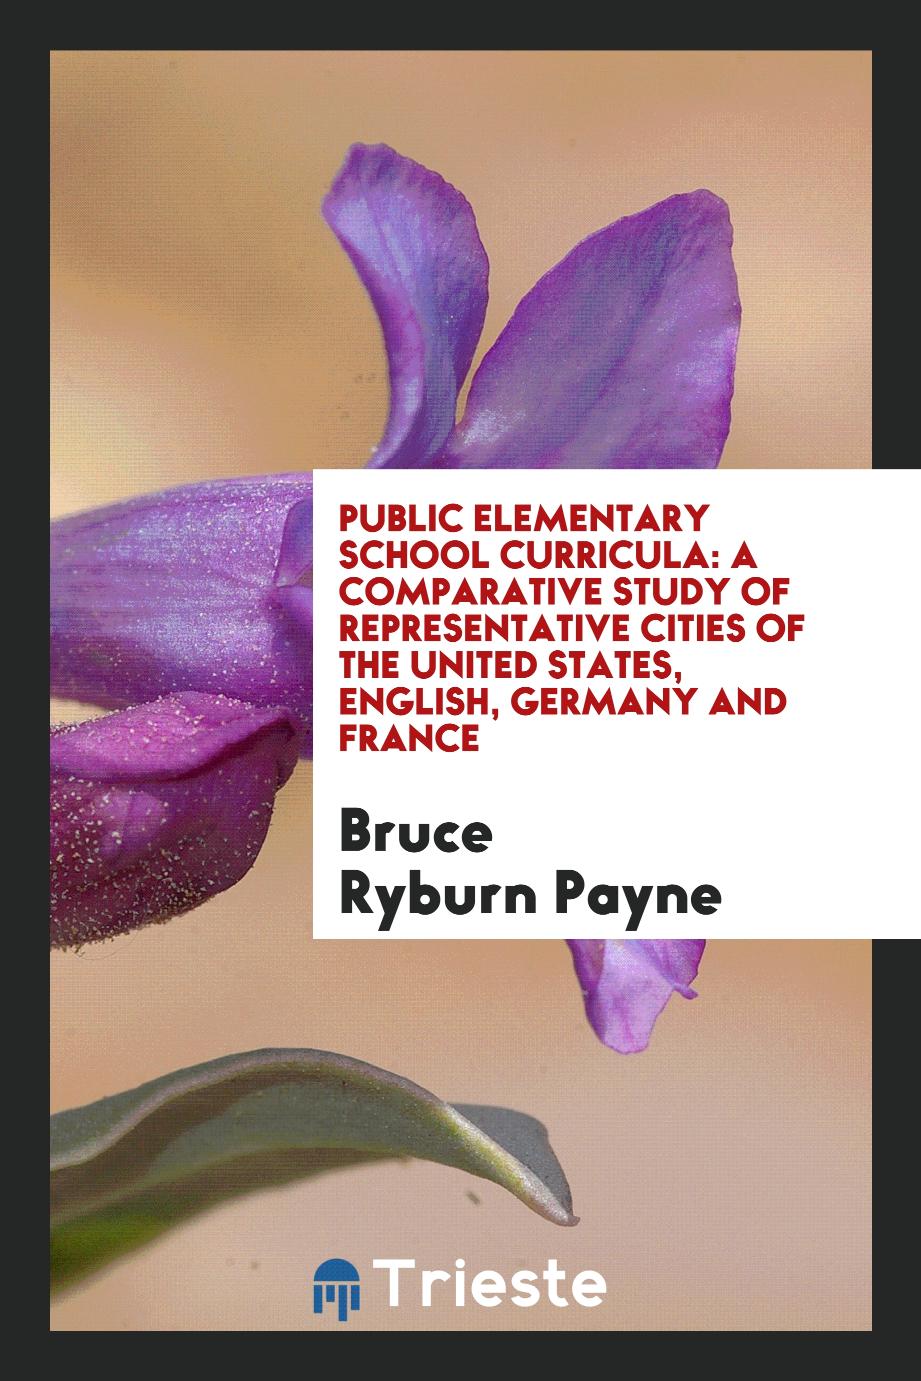 Public Elementary School Curricula: A Comparative Study of Representative Cities of the United States, English, Germany and France